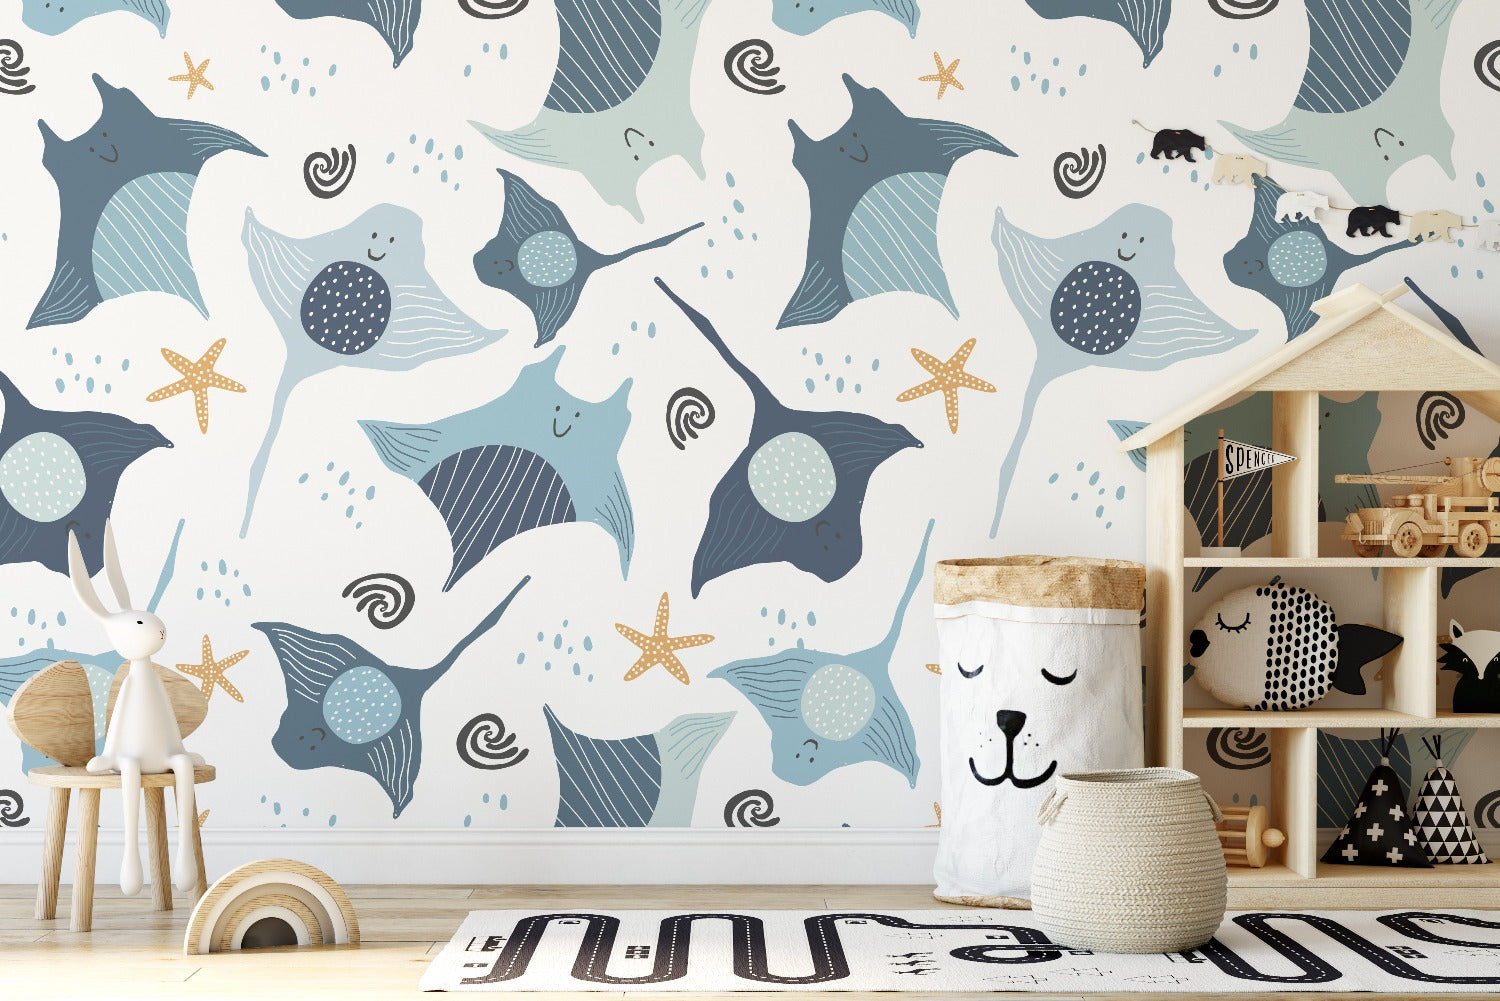 A playful underwater-themed wallpaper, Kids Wallpaper - Smiley Rays, featuring smiling stingrays and dotted fish in shades of blue and beige, interspersed with starfish and whimsical water swirls. The scene creates a happy aquatic atmosphere in a child's playroom with toys and a teepee shelf.